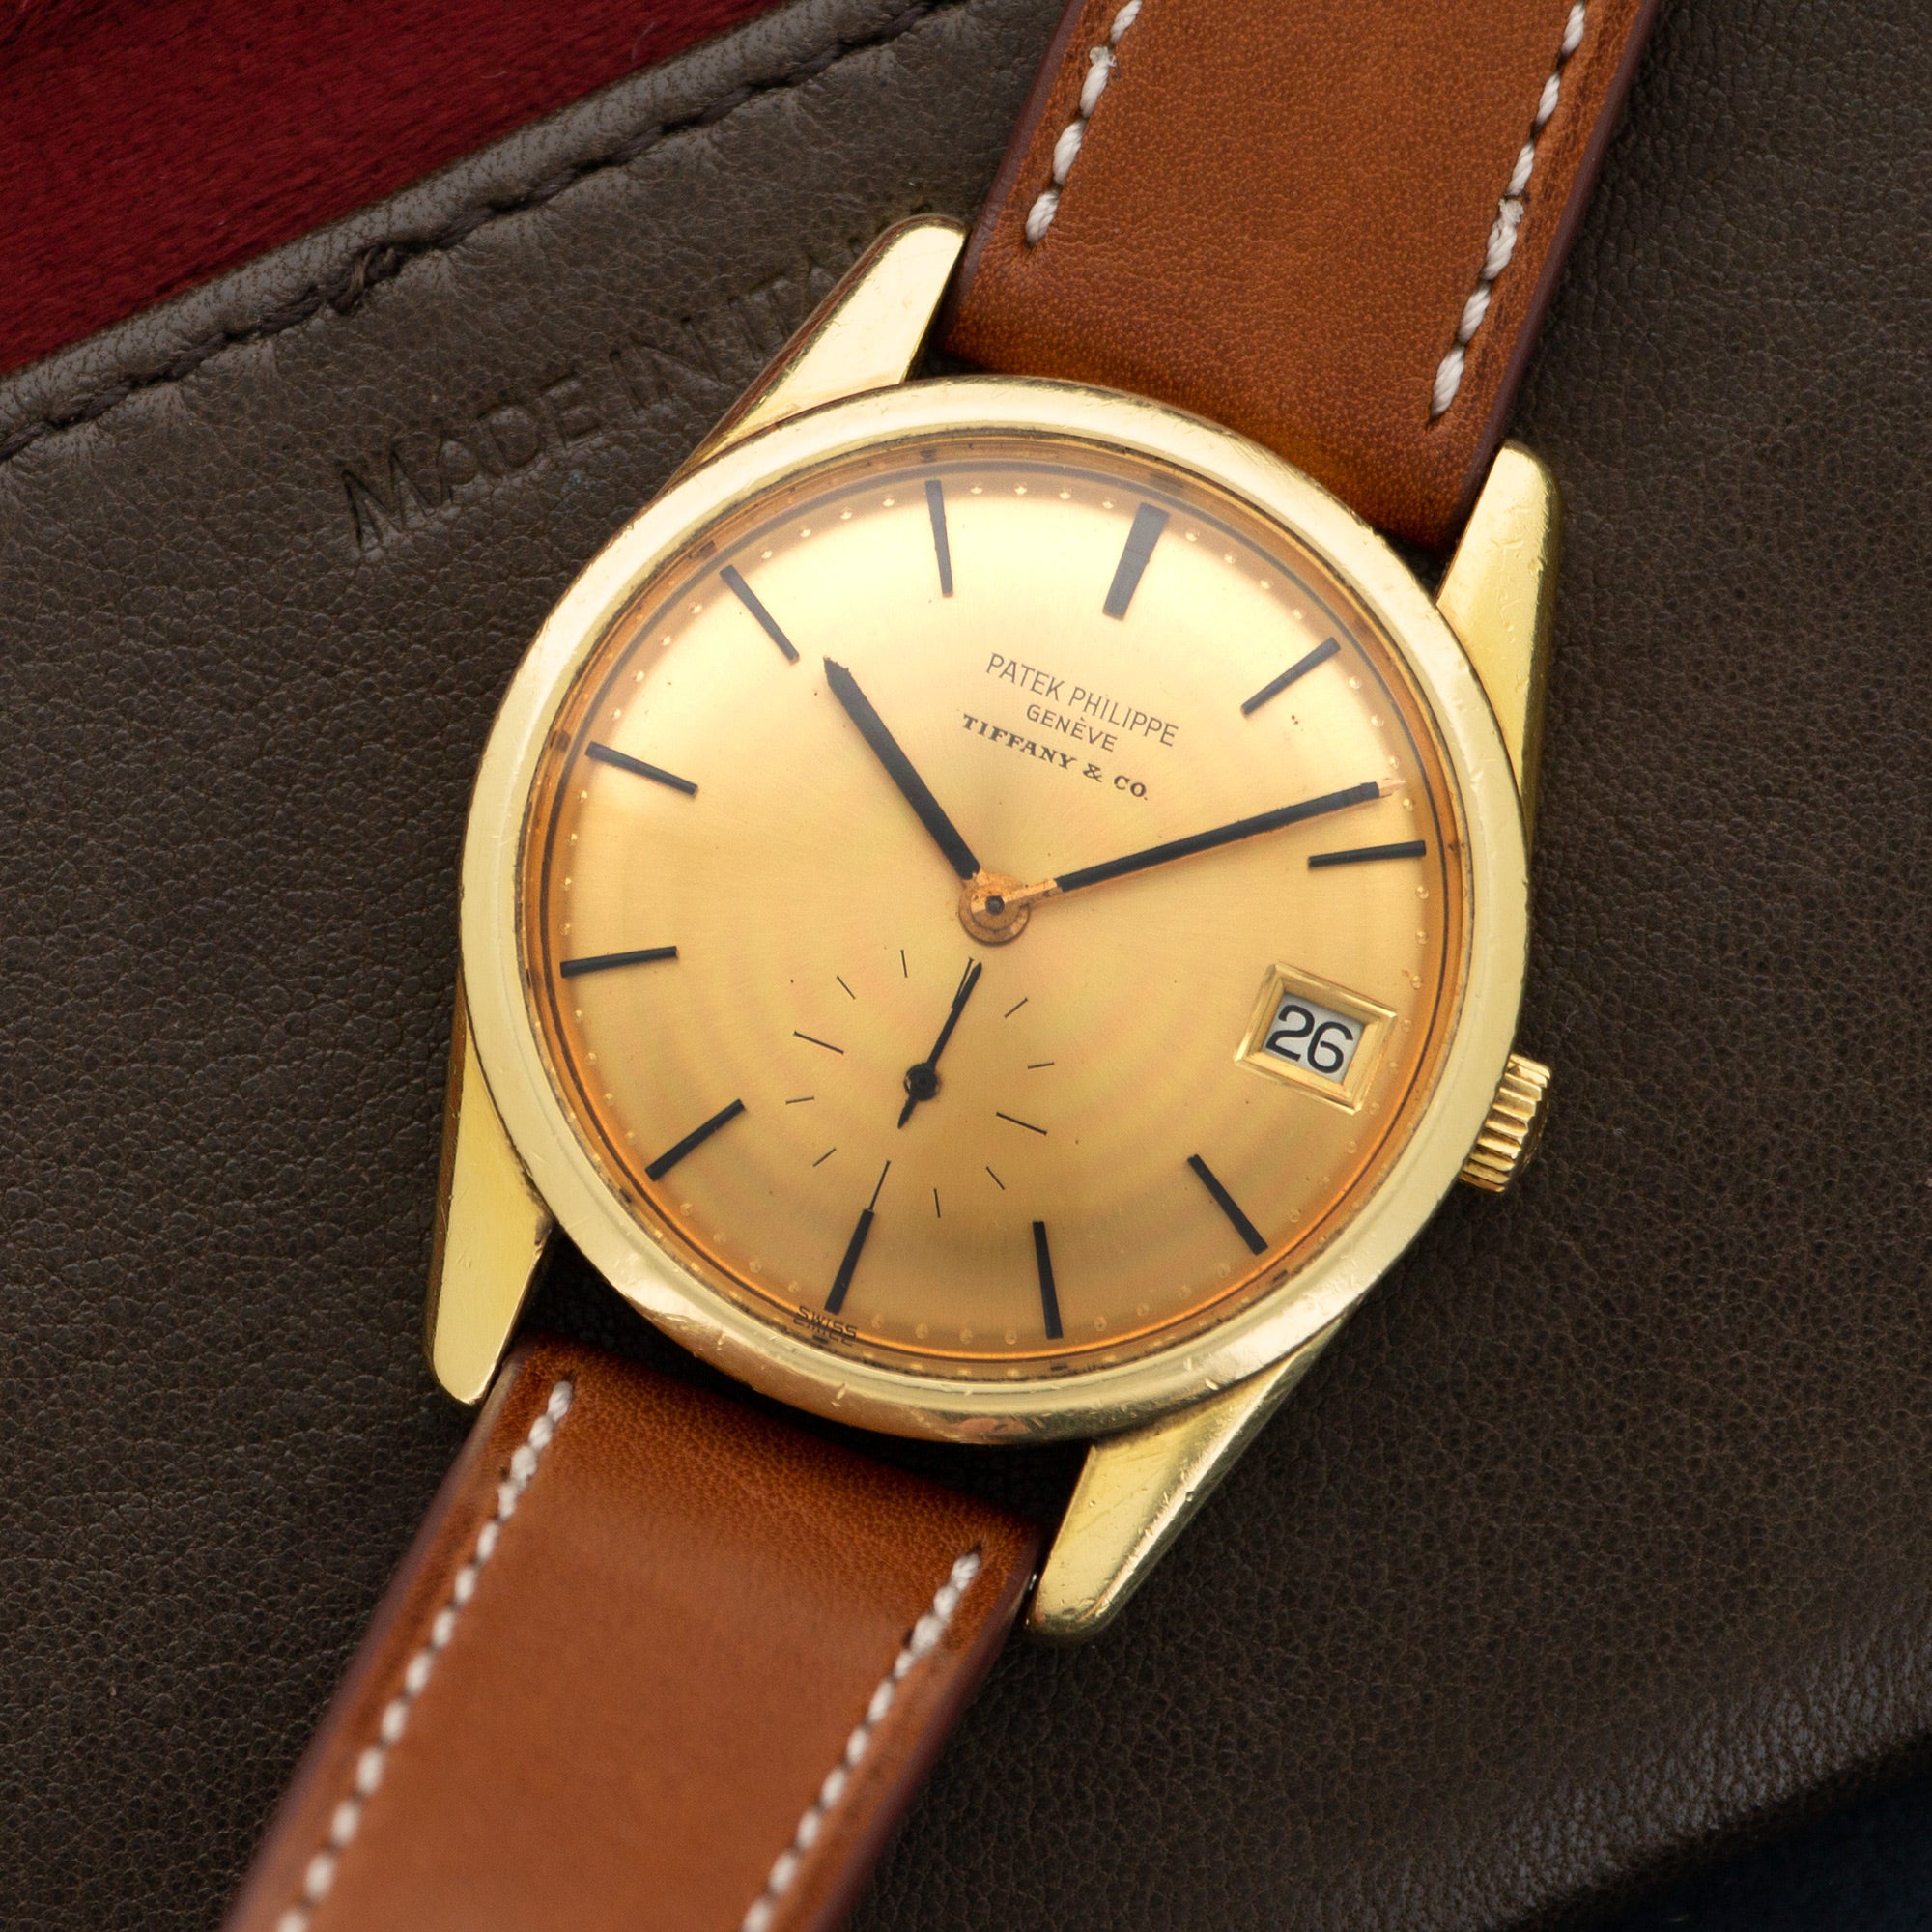 Patek Philippe - Patek Philippe Yellow Gold Automatic Watch Ref. 3558 Retailed by Tiffany & Co. - The Keystone Watches